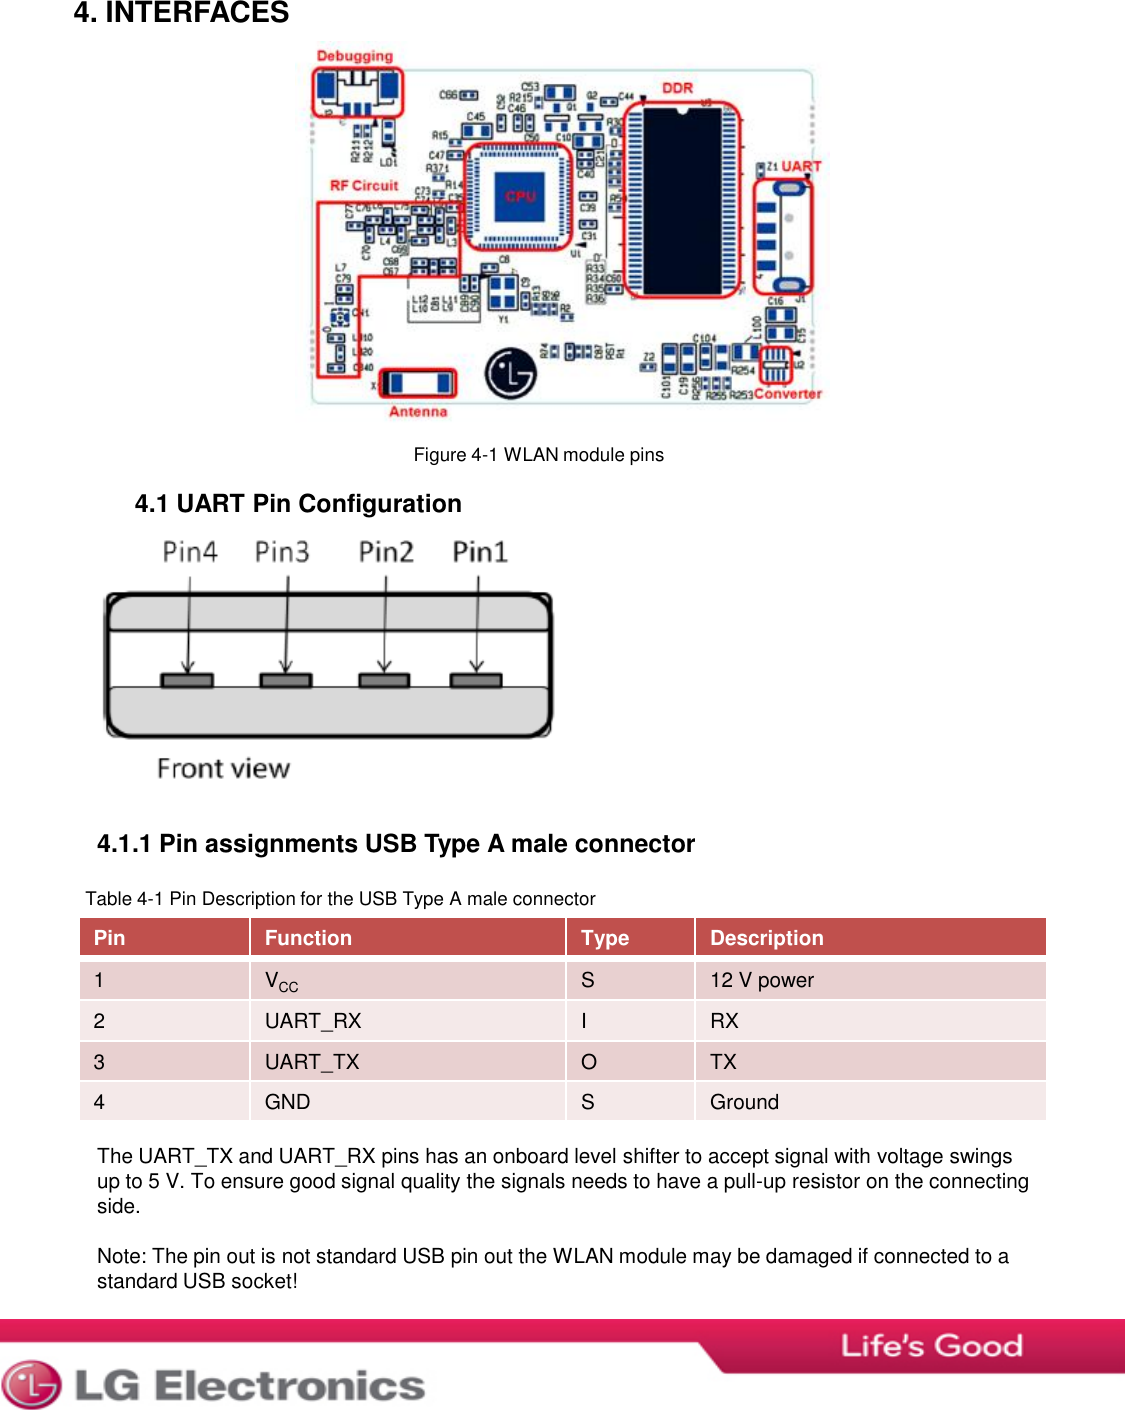 4. INTERFACES Figure 4-1 WLAN module pins 4.1 UART Pin Configuration 4.1.1 Pin assignments USB Type A male connector Table 4-1 Pin Description for the USB Type A male connector The UART_TX and UART_RX pins has an onboard level shifter to accept signal with voltage swings  up to 5 V. To ensure good signal quality the signals needs to have a pull-up resistor on the connecting side.   Note: The pin out is not standard USB pin out the WLAN module may be damaged if connected to a  standard USB socket!  Pin Function Type Description 1 VCC S 12 V power 2 UART_RX I RX 3 UART_TX O TX 4 GND S Ground 